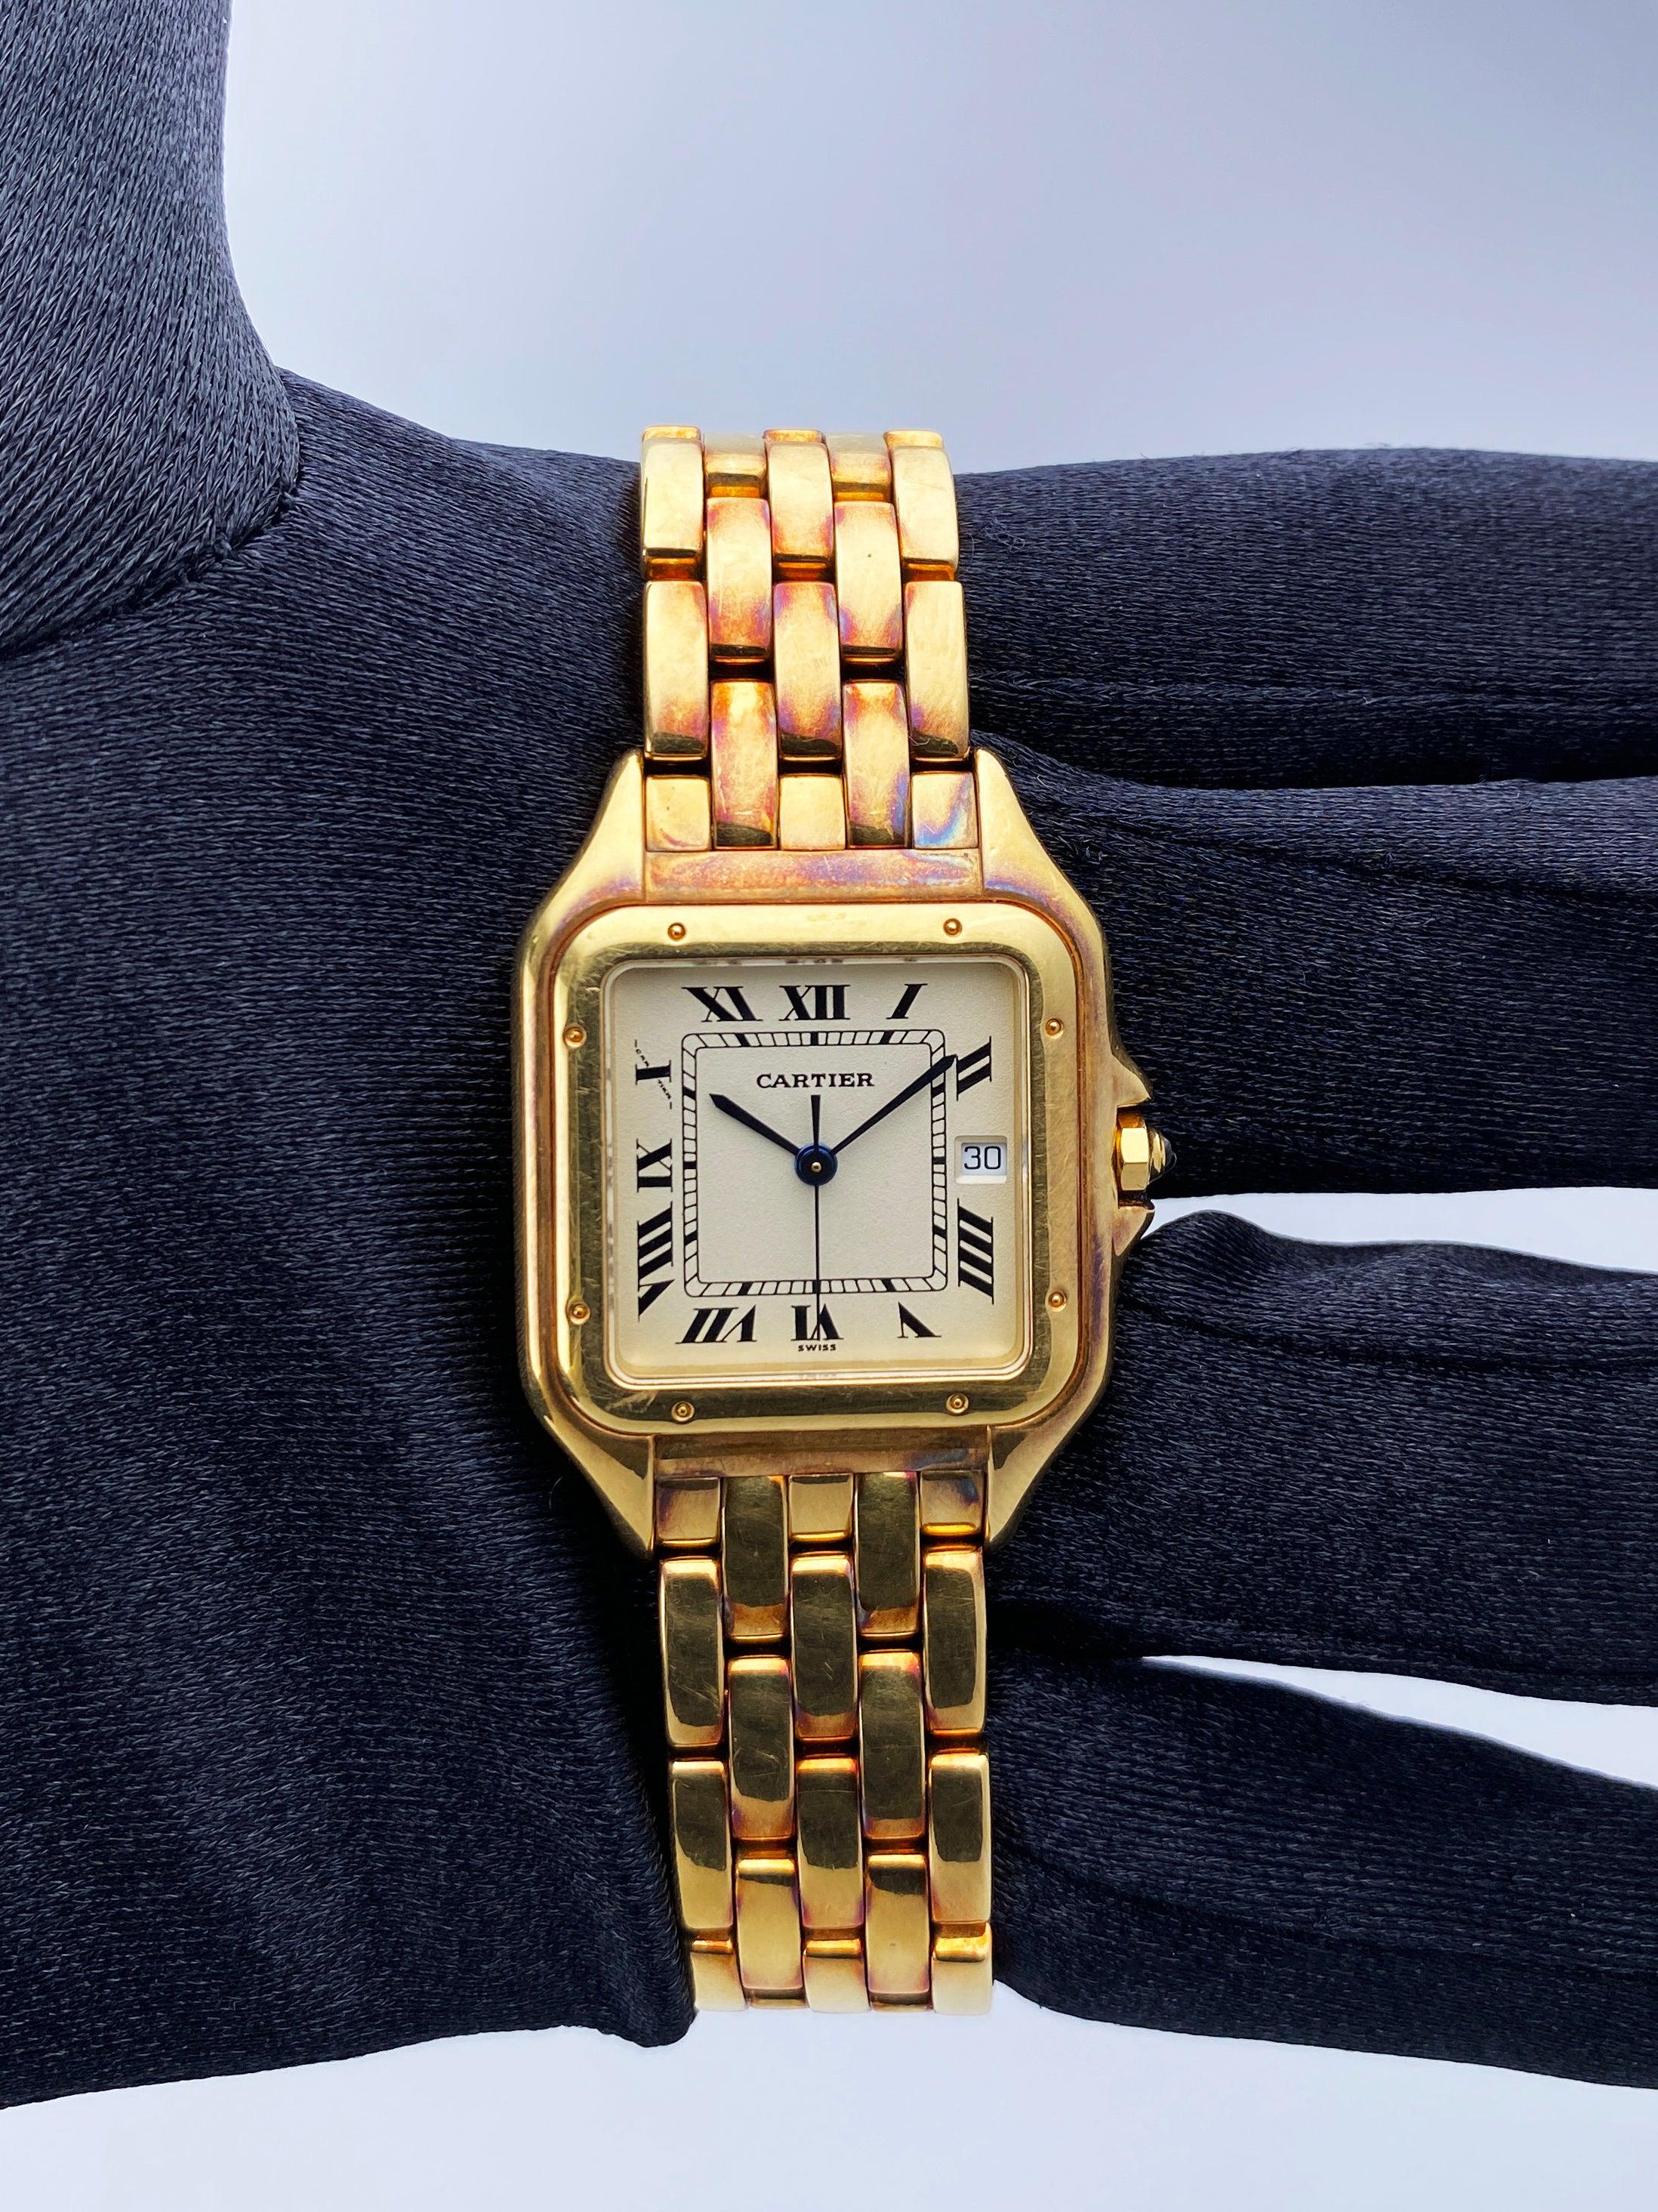 Cartier Panthere Large 106000M Mens Watch. 29mm 18K yellow gold case with 18K yellow gold smoothed bezel. Off-White dial with blue steel hands and black Roman numeral hour markers. Minute markers on the inner dial. Date display at the 3 o'clock